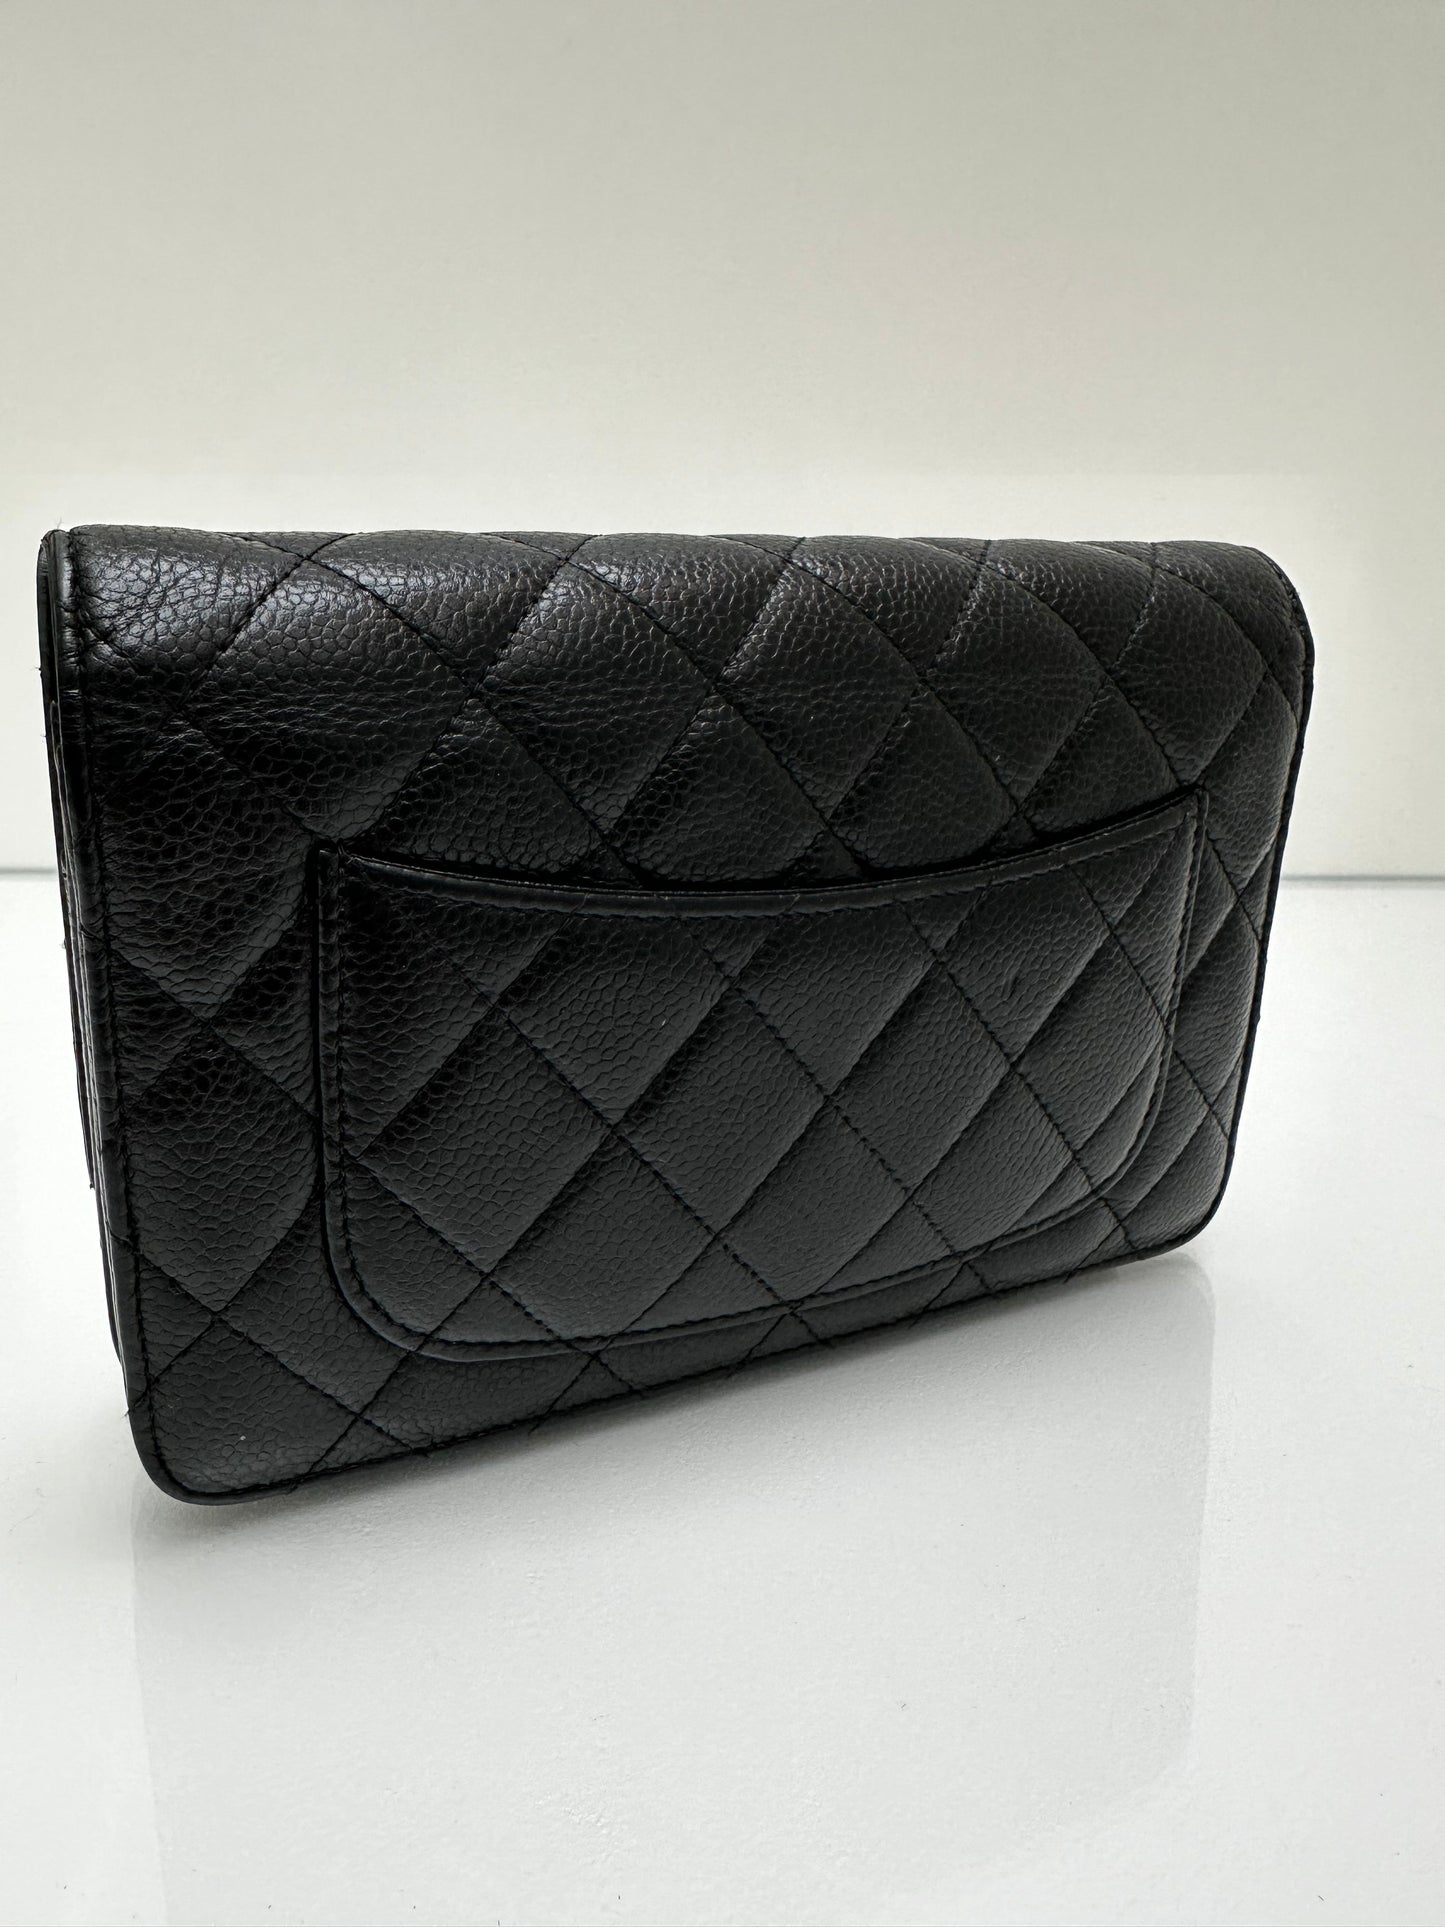 Chanel Black Quilted Caviar Leather WOC SHW